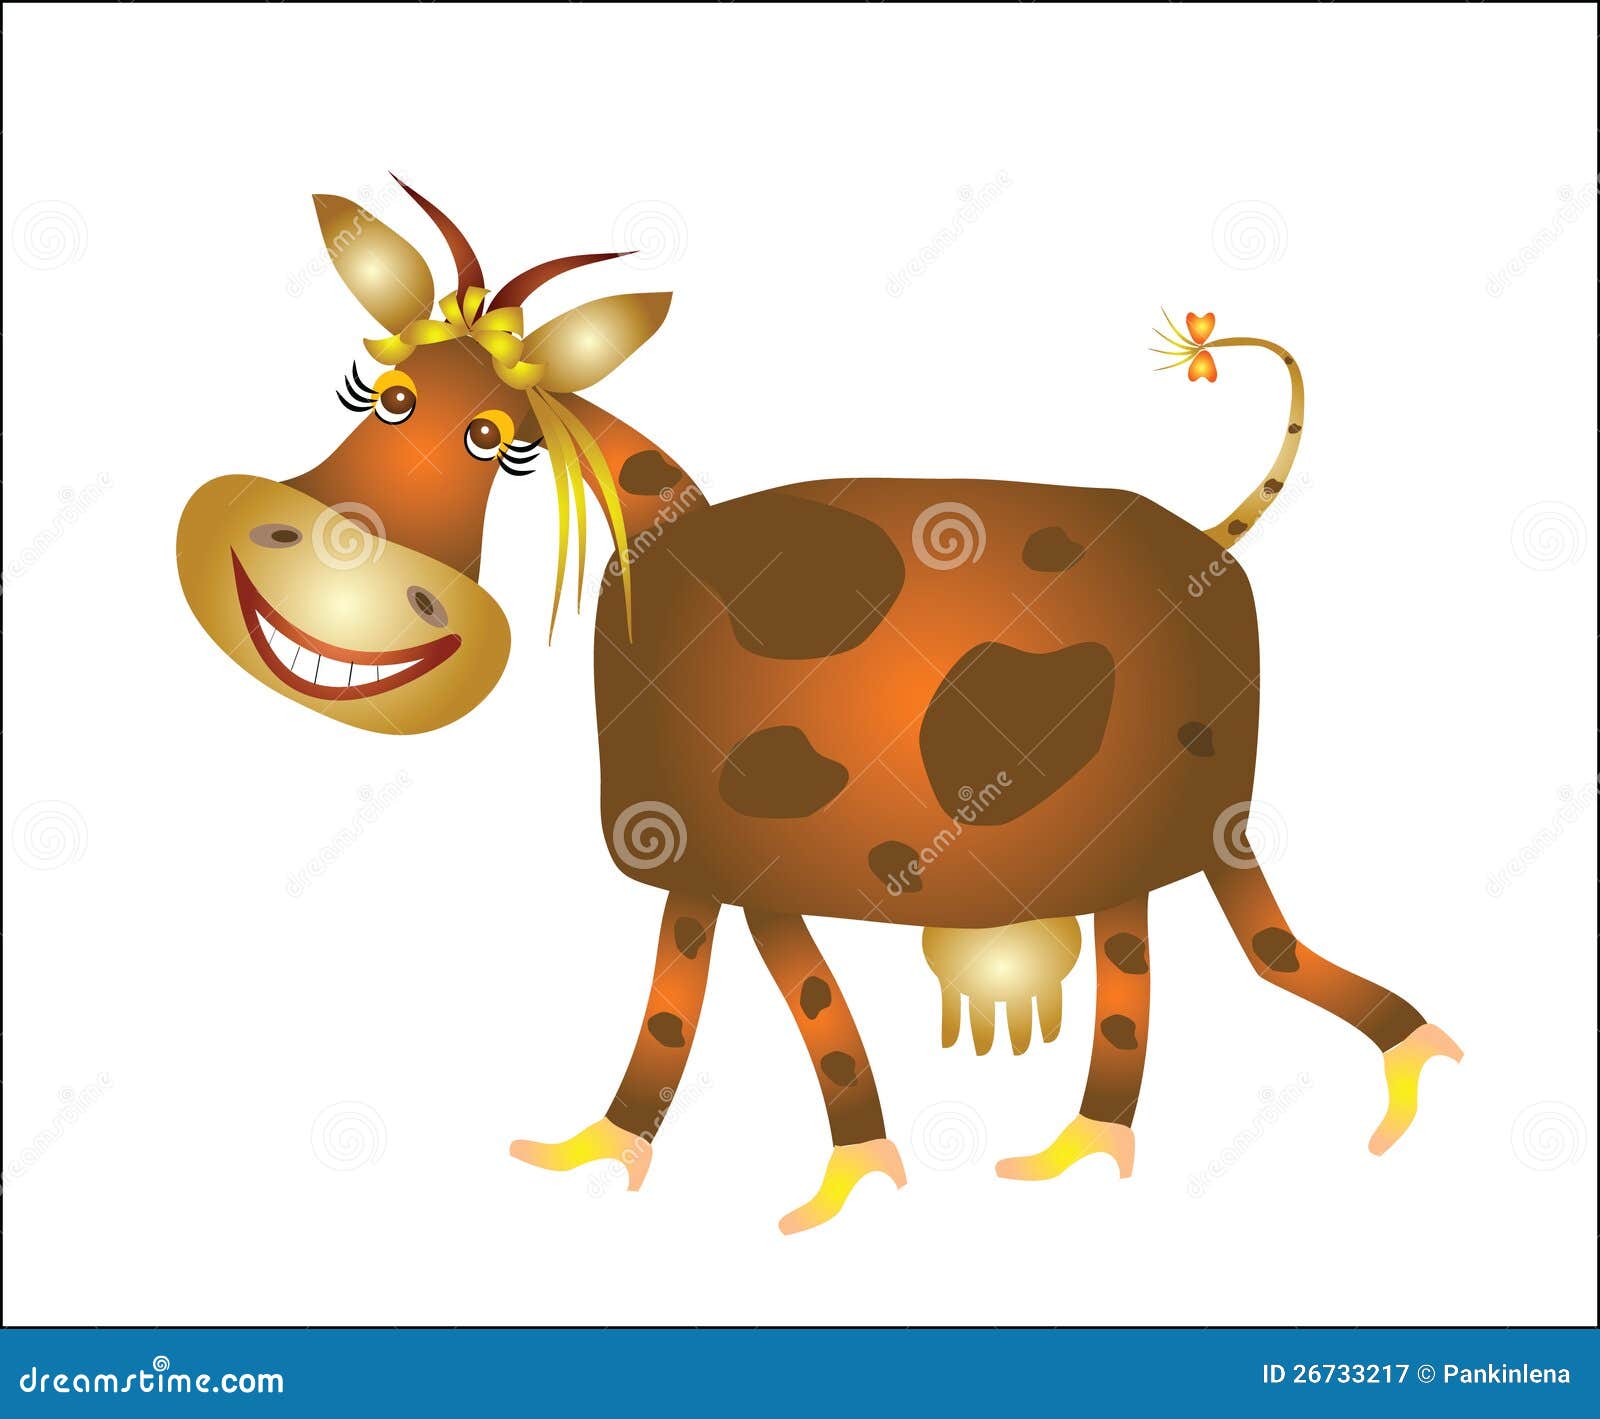 Funny Cow Cartoon Royalty Free Stock Photography - Image: 26733217